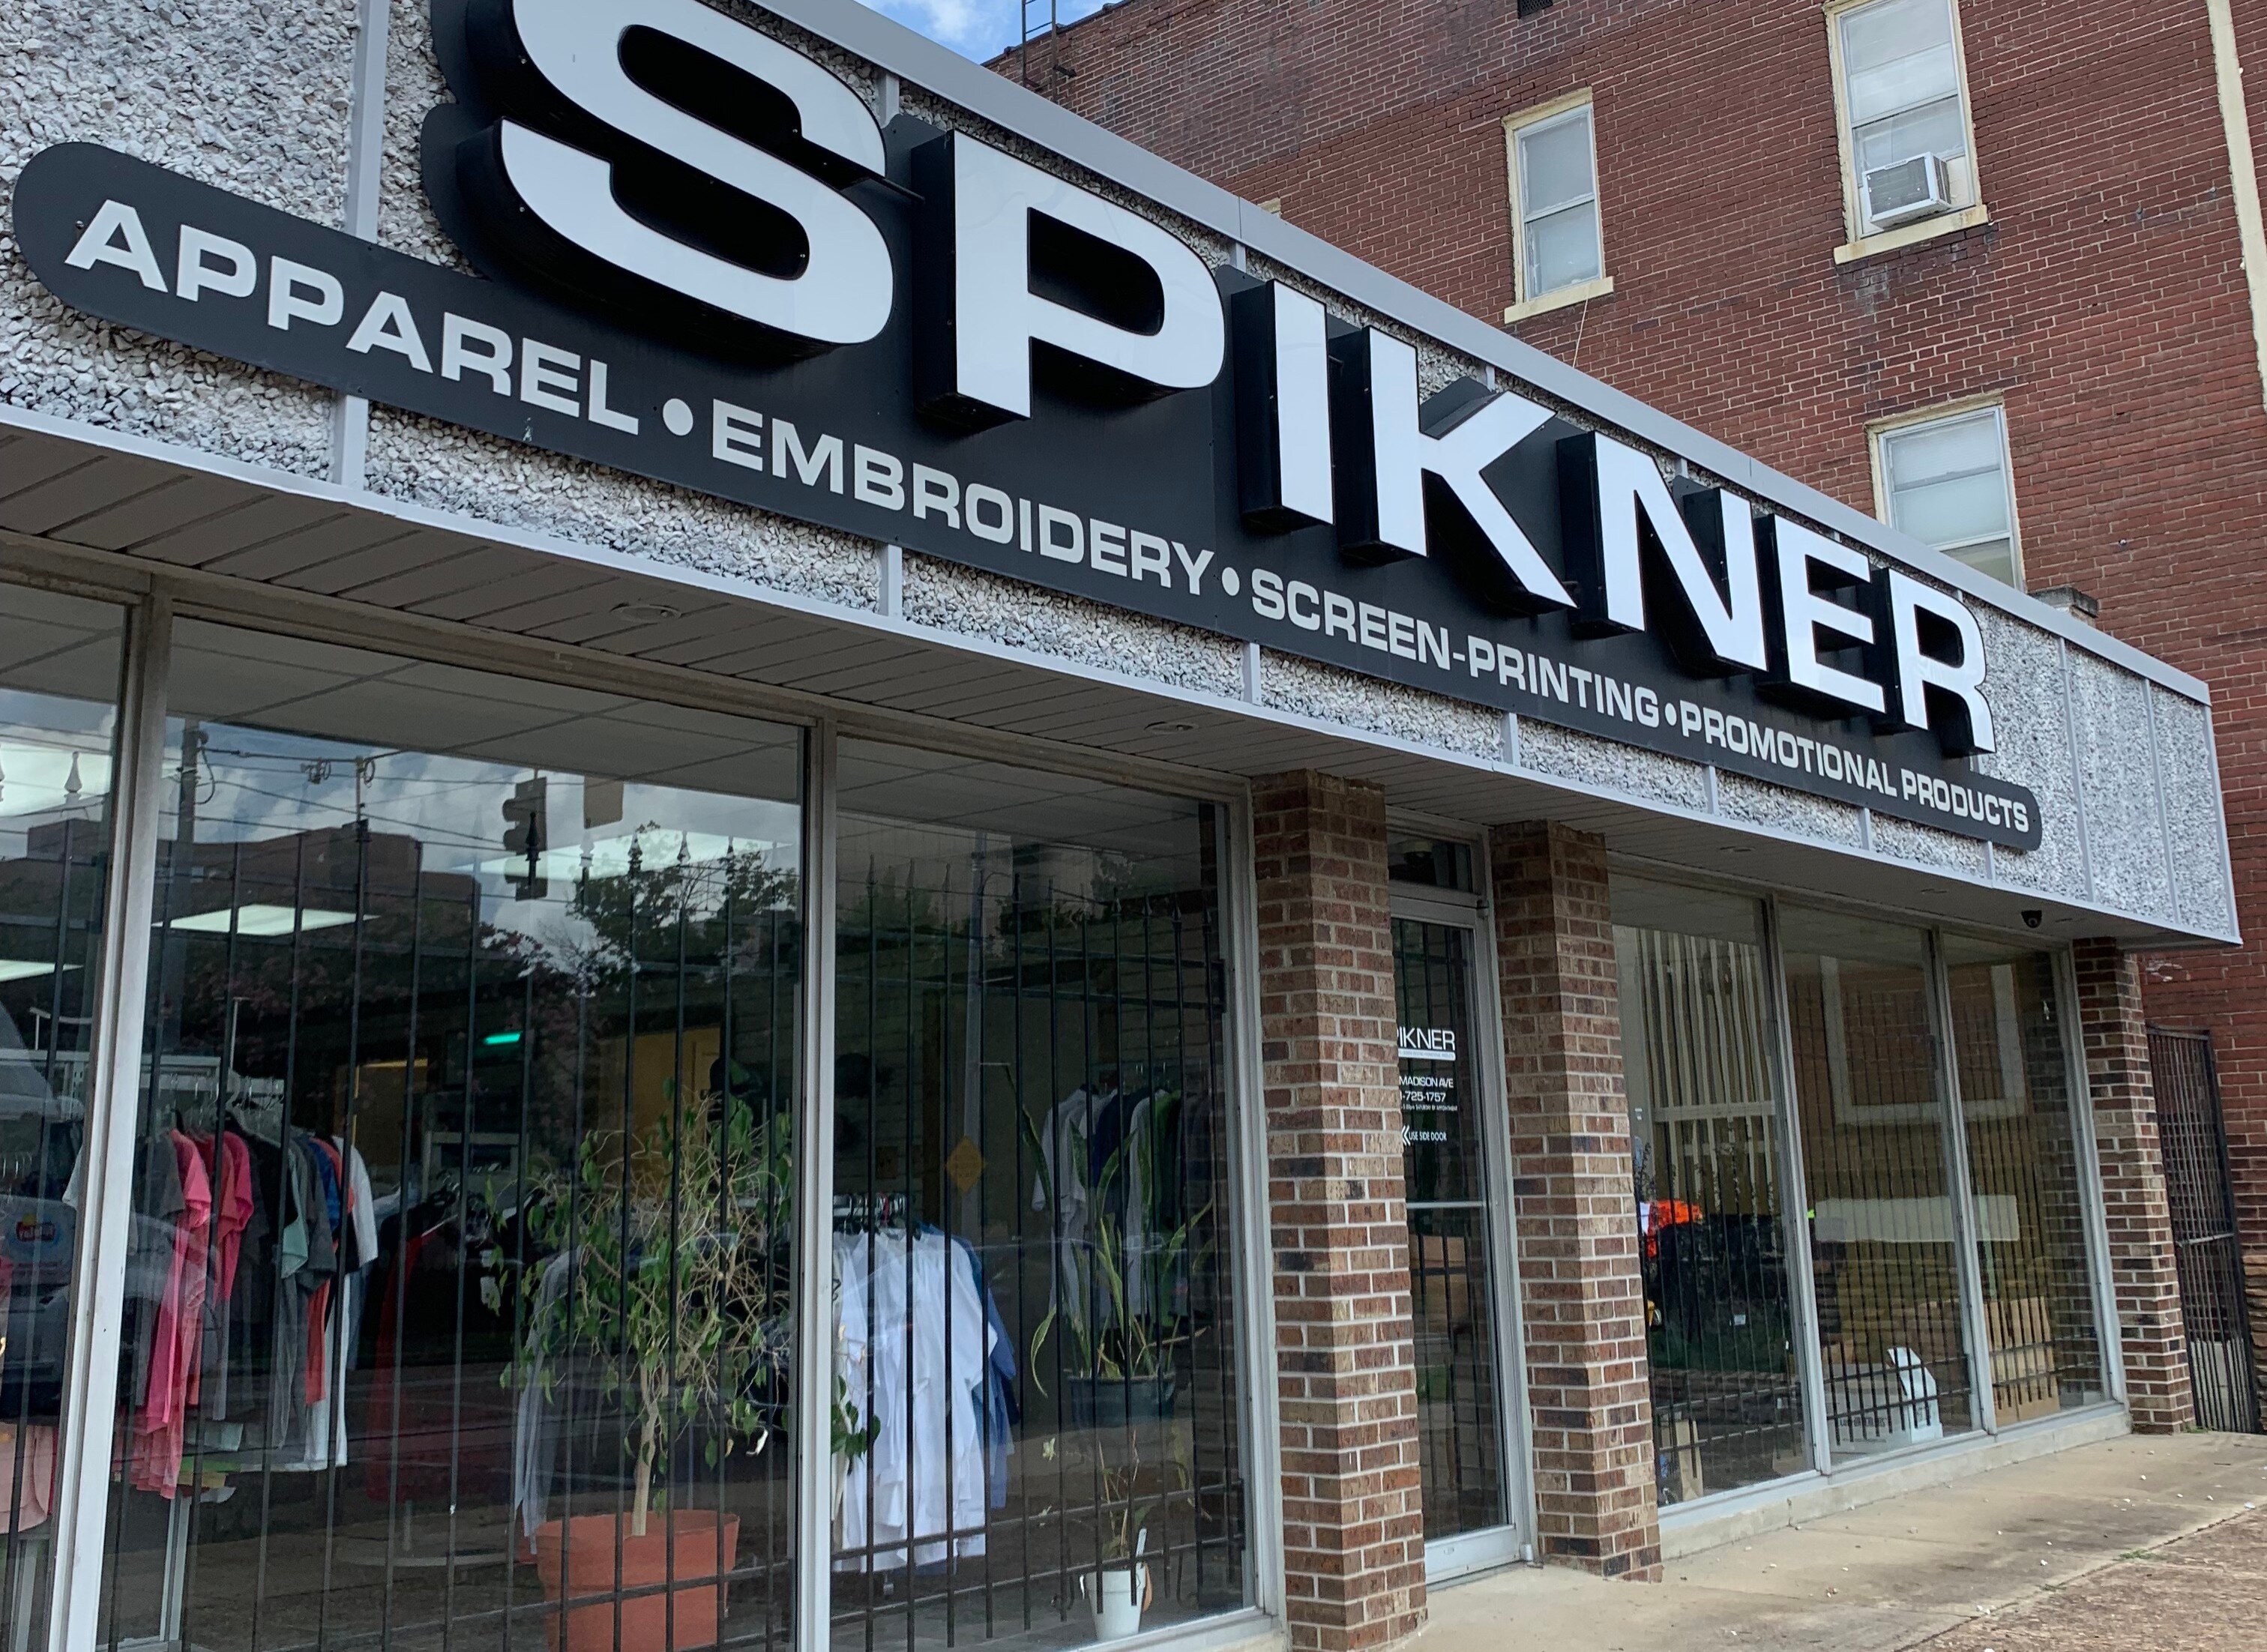 Spikner Embroidery and Screen-Printing is located at 1210 Madison Avenue in Madison Heights and has been in operation for 24 years. (Ashlei Williams)